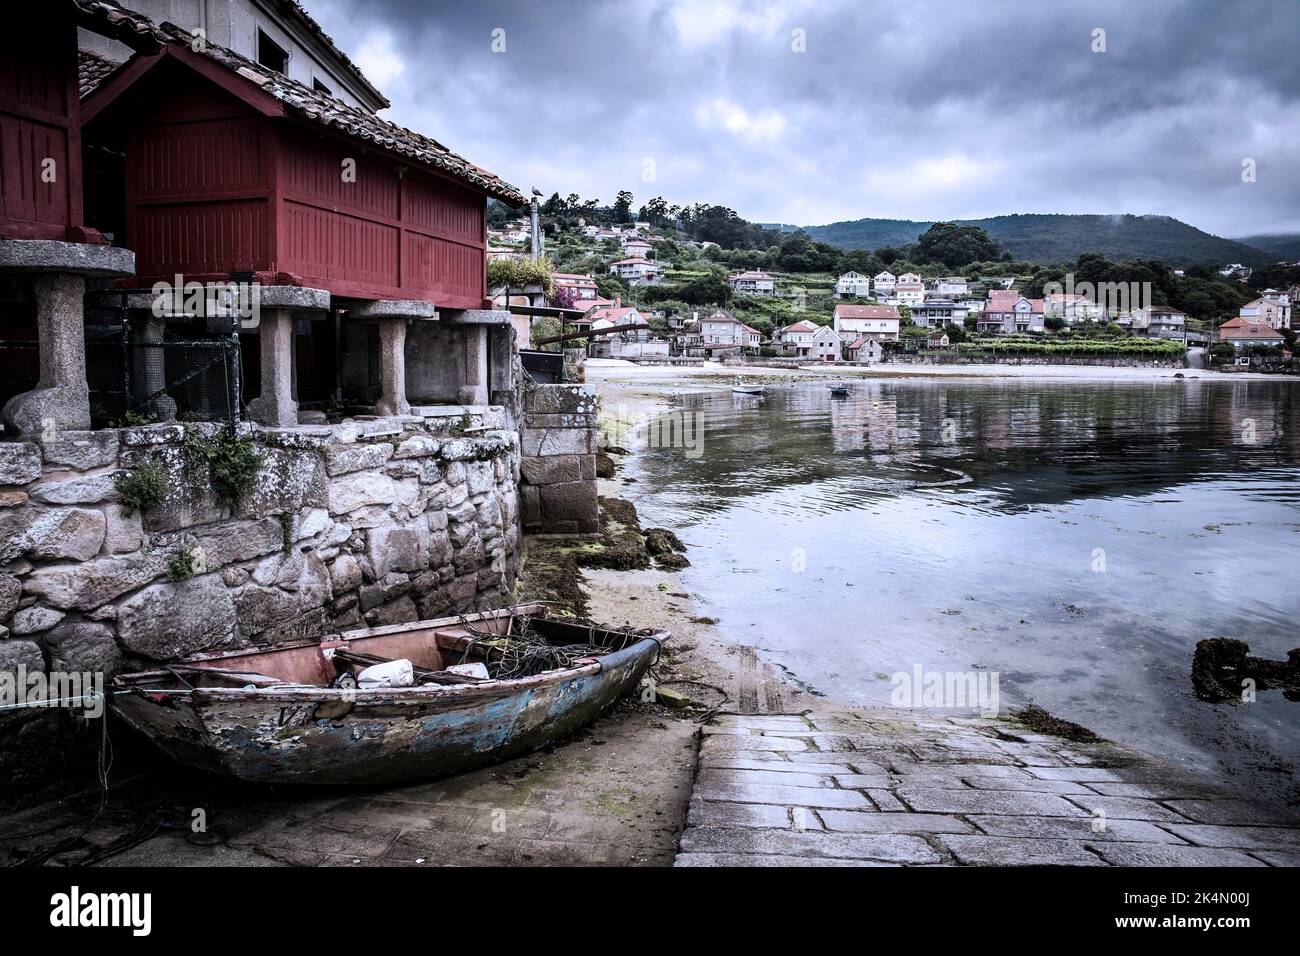 Horreo and old boat in Combarro. Pontevedra. Galicia. Combarro (Poyo). Seafaring town, close to both the provincial capital, Pontevedra. Remarkable Stock Photo